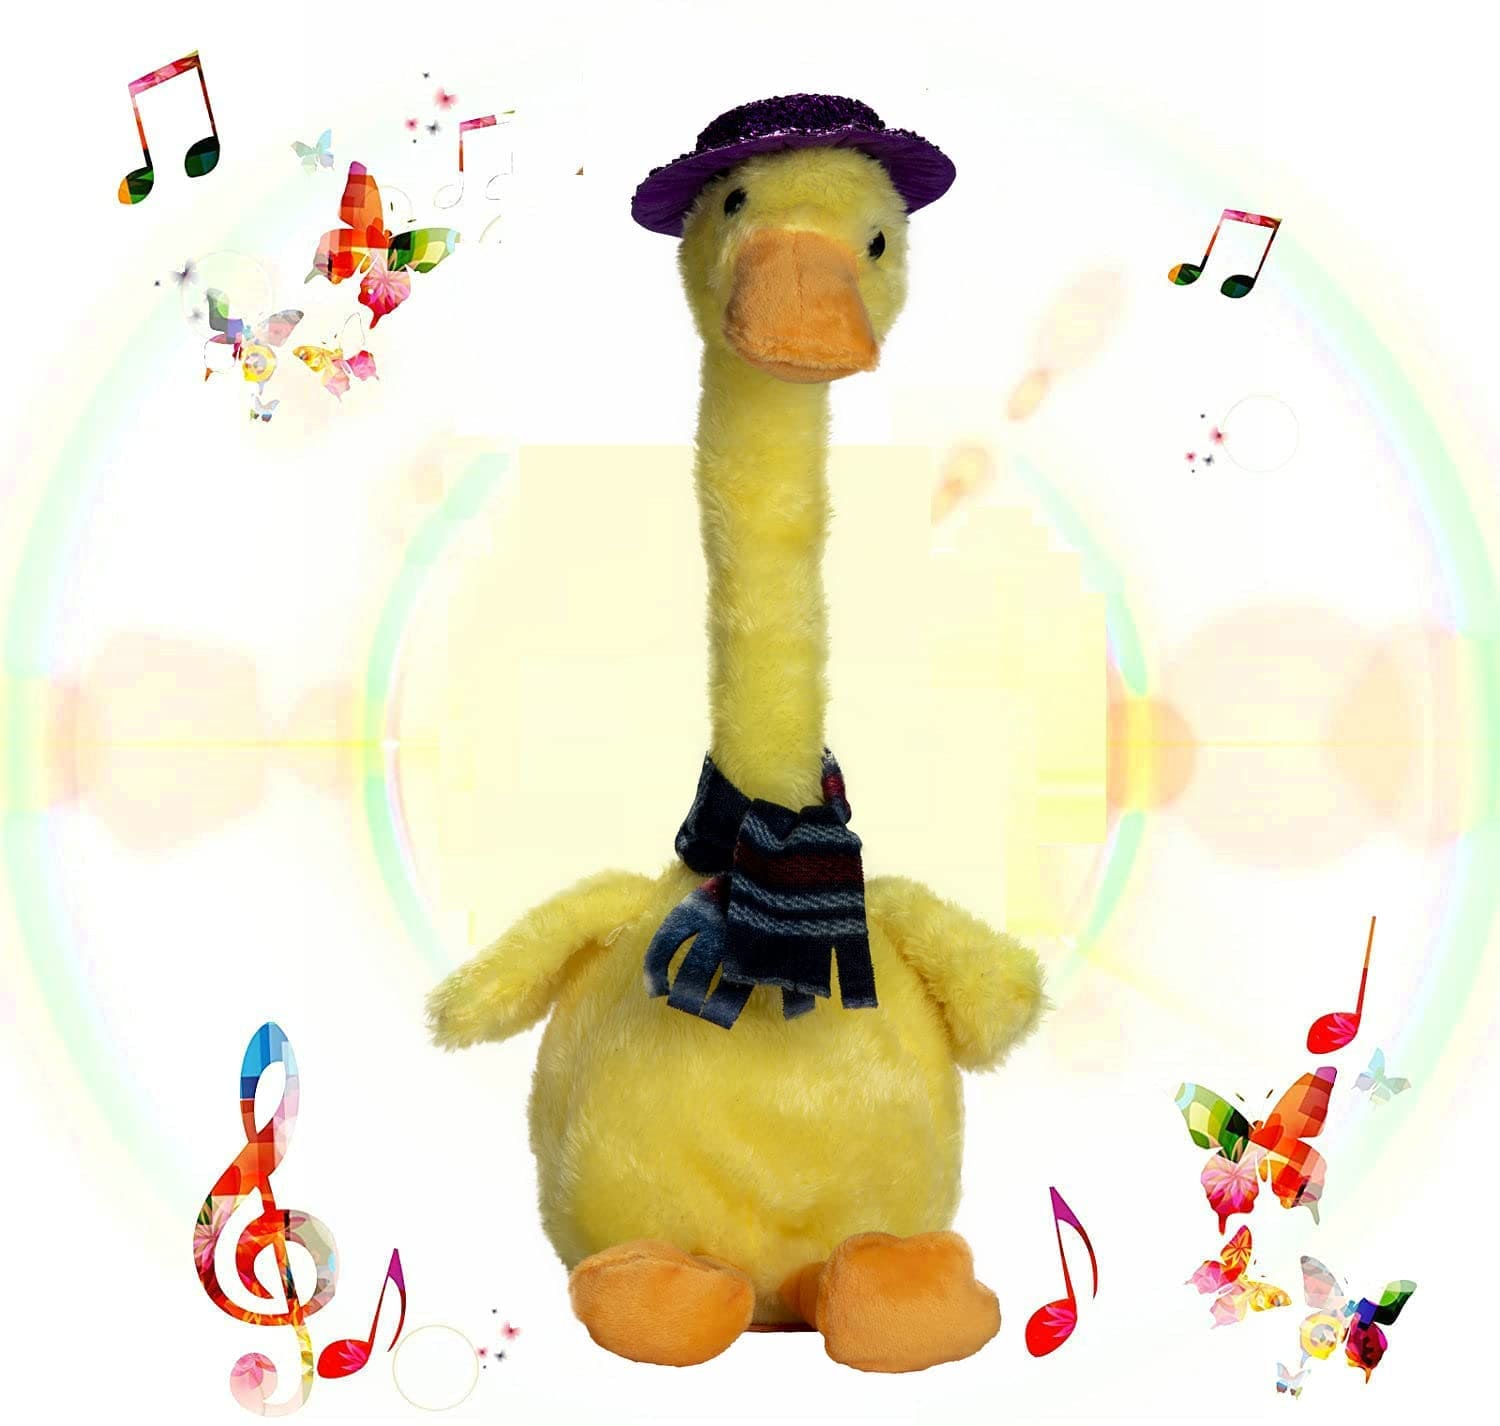 Lovely Talking Toy Dancing Duck, Electronic Dancing Ducks with Funny Clothes, Duck Plush Toy, Luminous Recording Learning to Speak Twisting Kid Toy, Speak Talk Sound Record Repeat Toy, Kids Education Toy